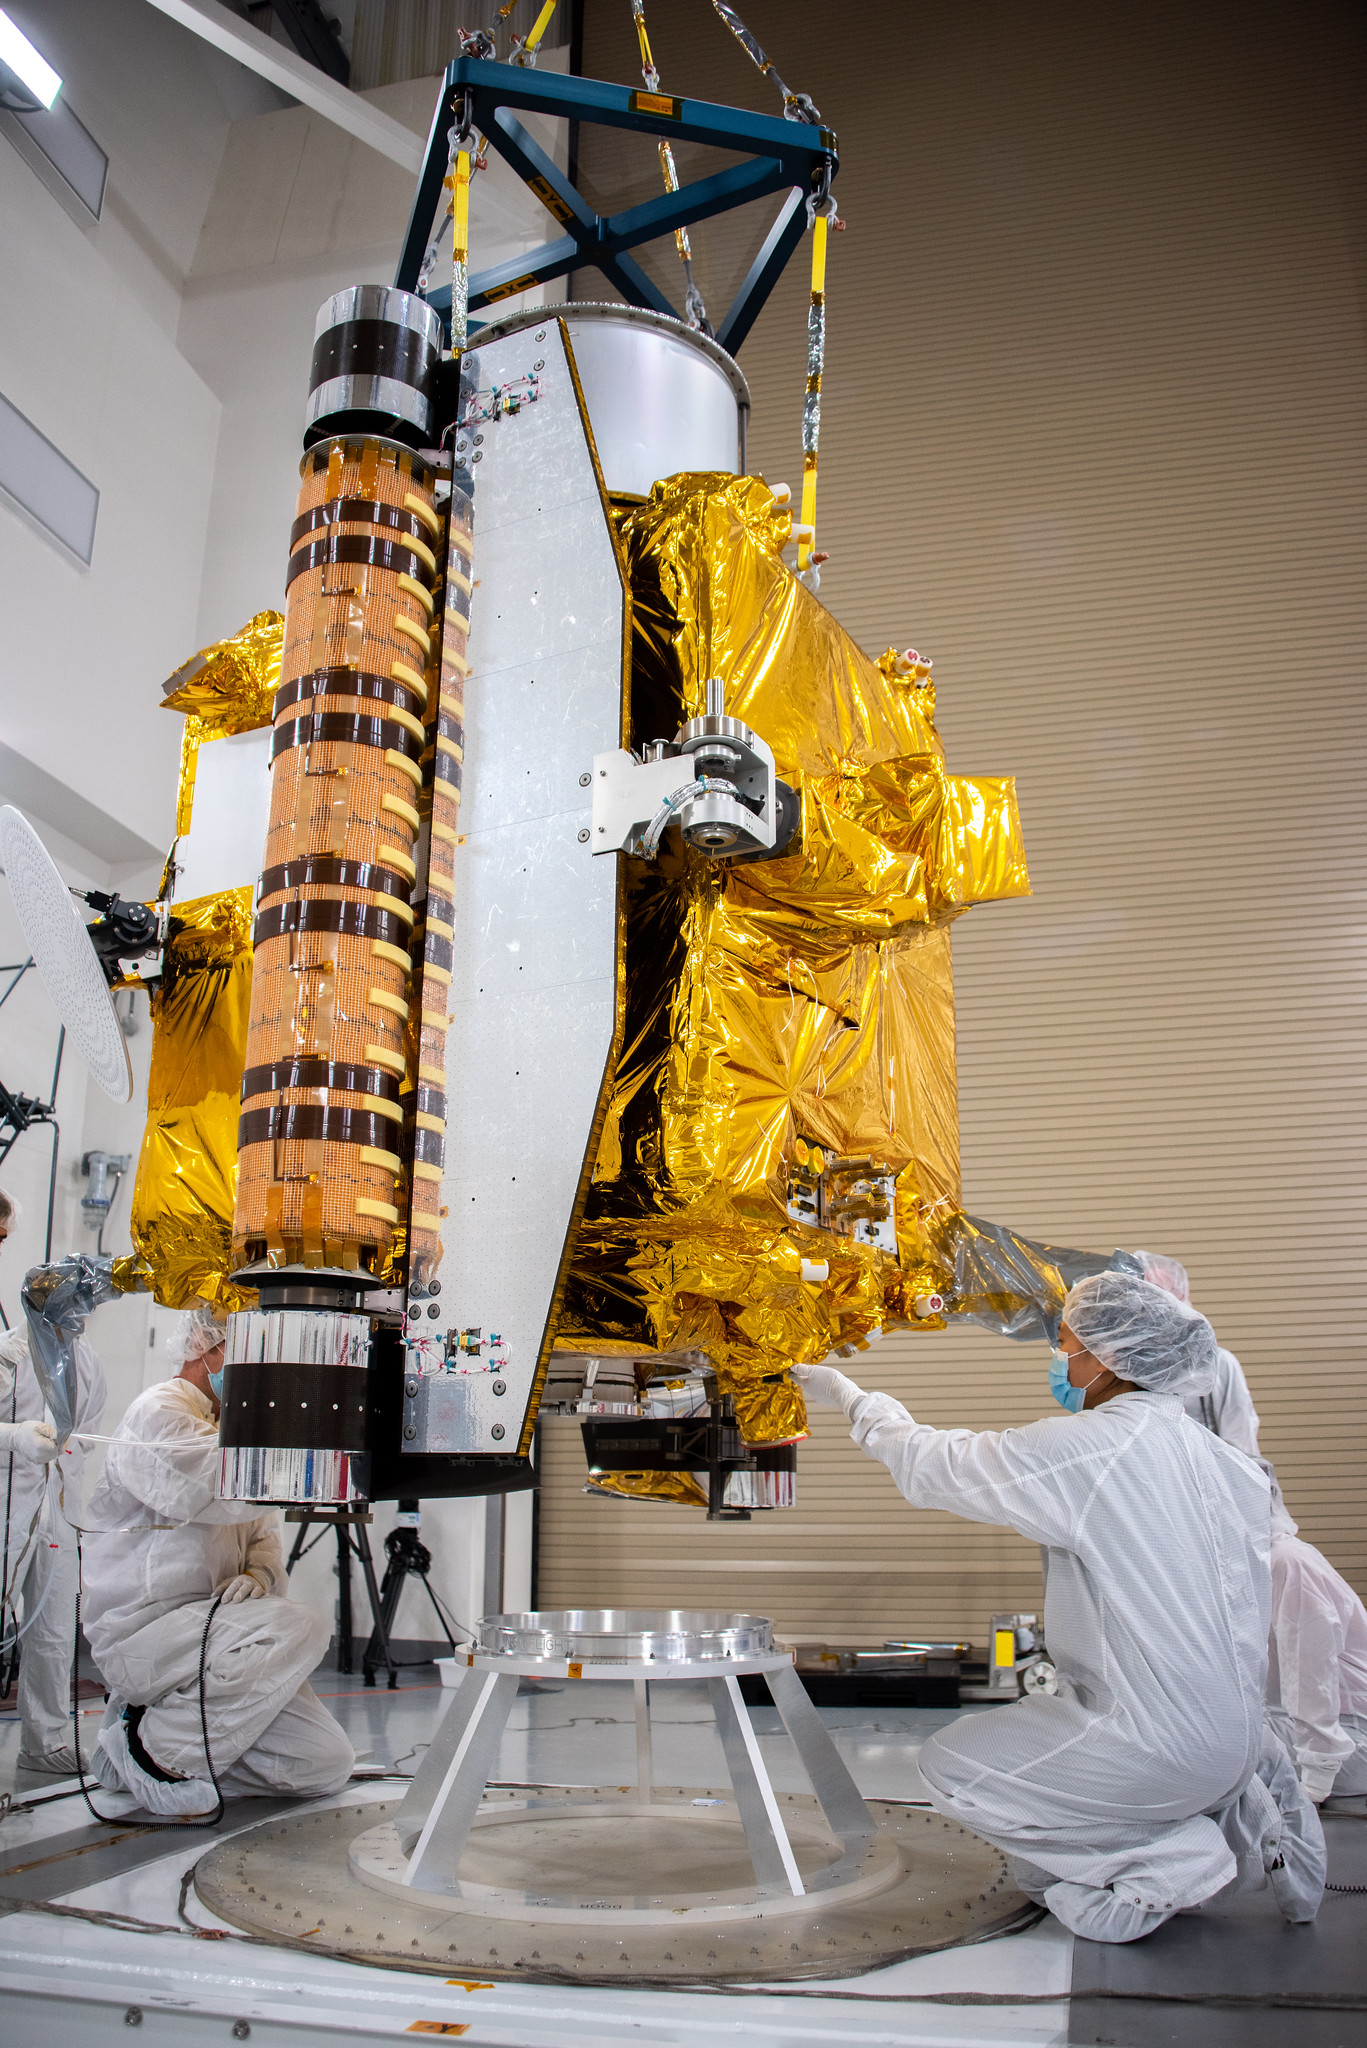 Persons in cleanroom garments inspecting DART satellite at Astrotech Vandenberg
Photo: NASA